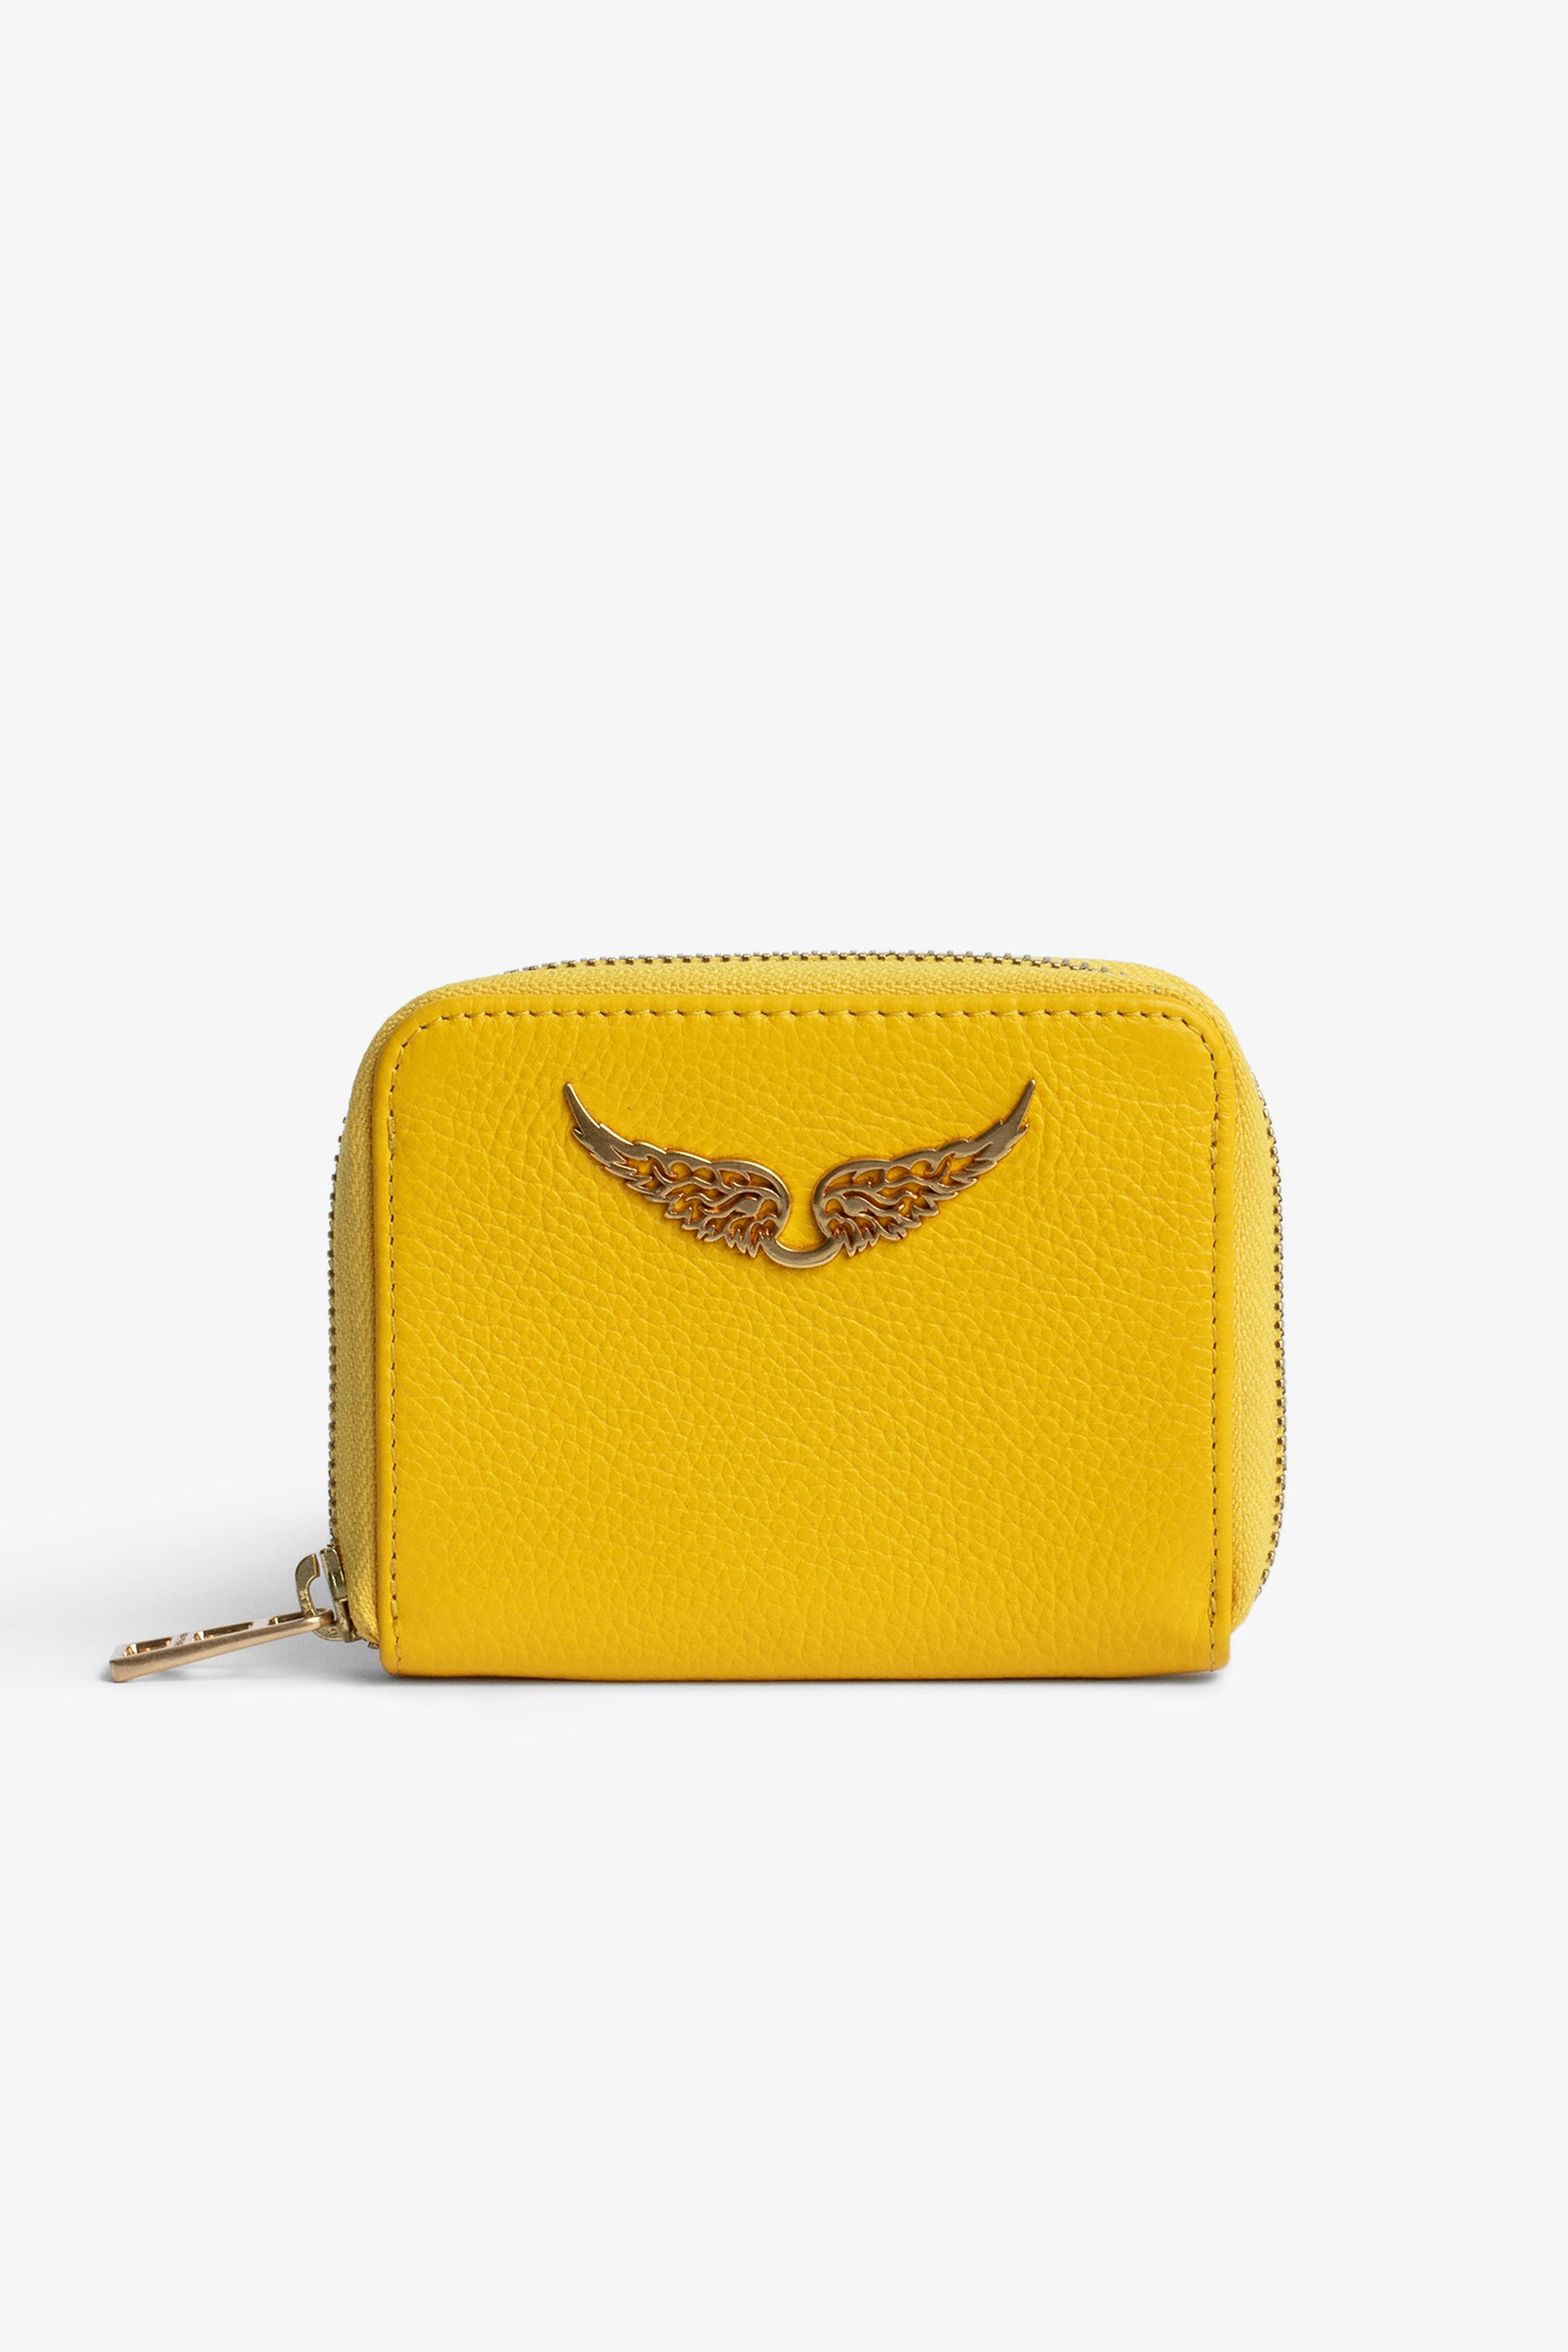 Mini ZV Coin 財布 Women’s coin purse in yellow grained leather